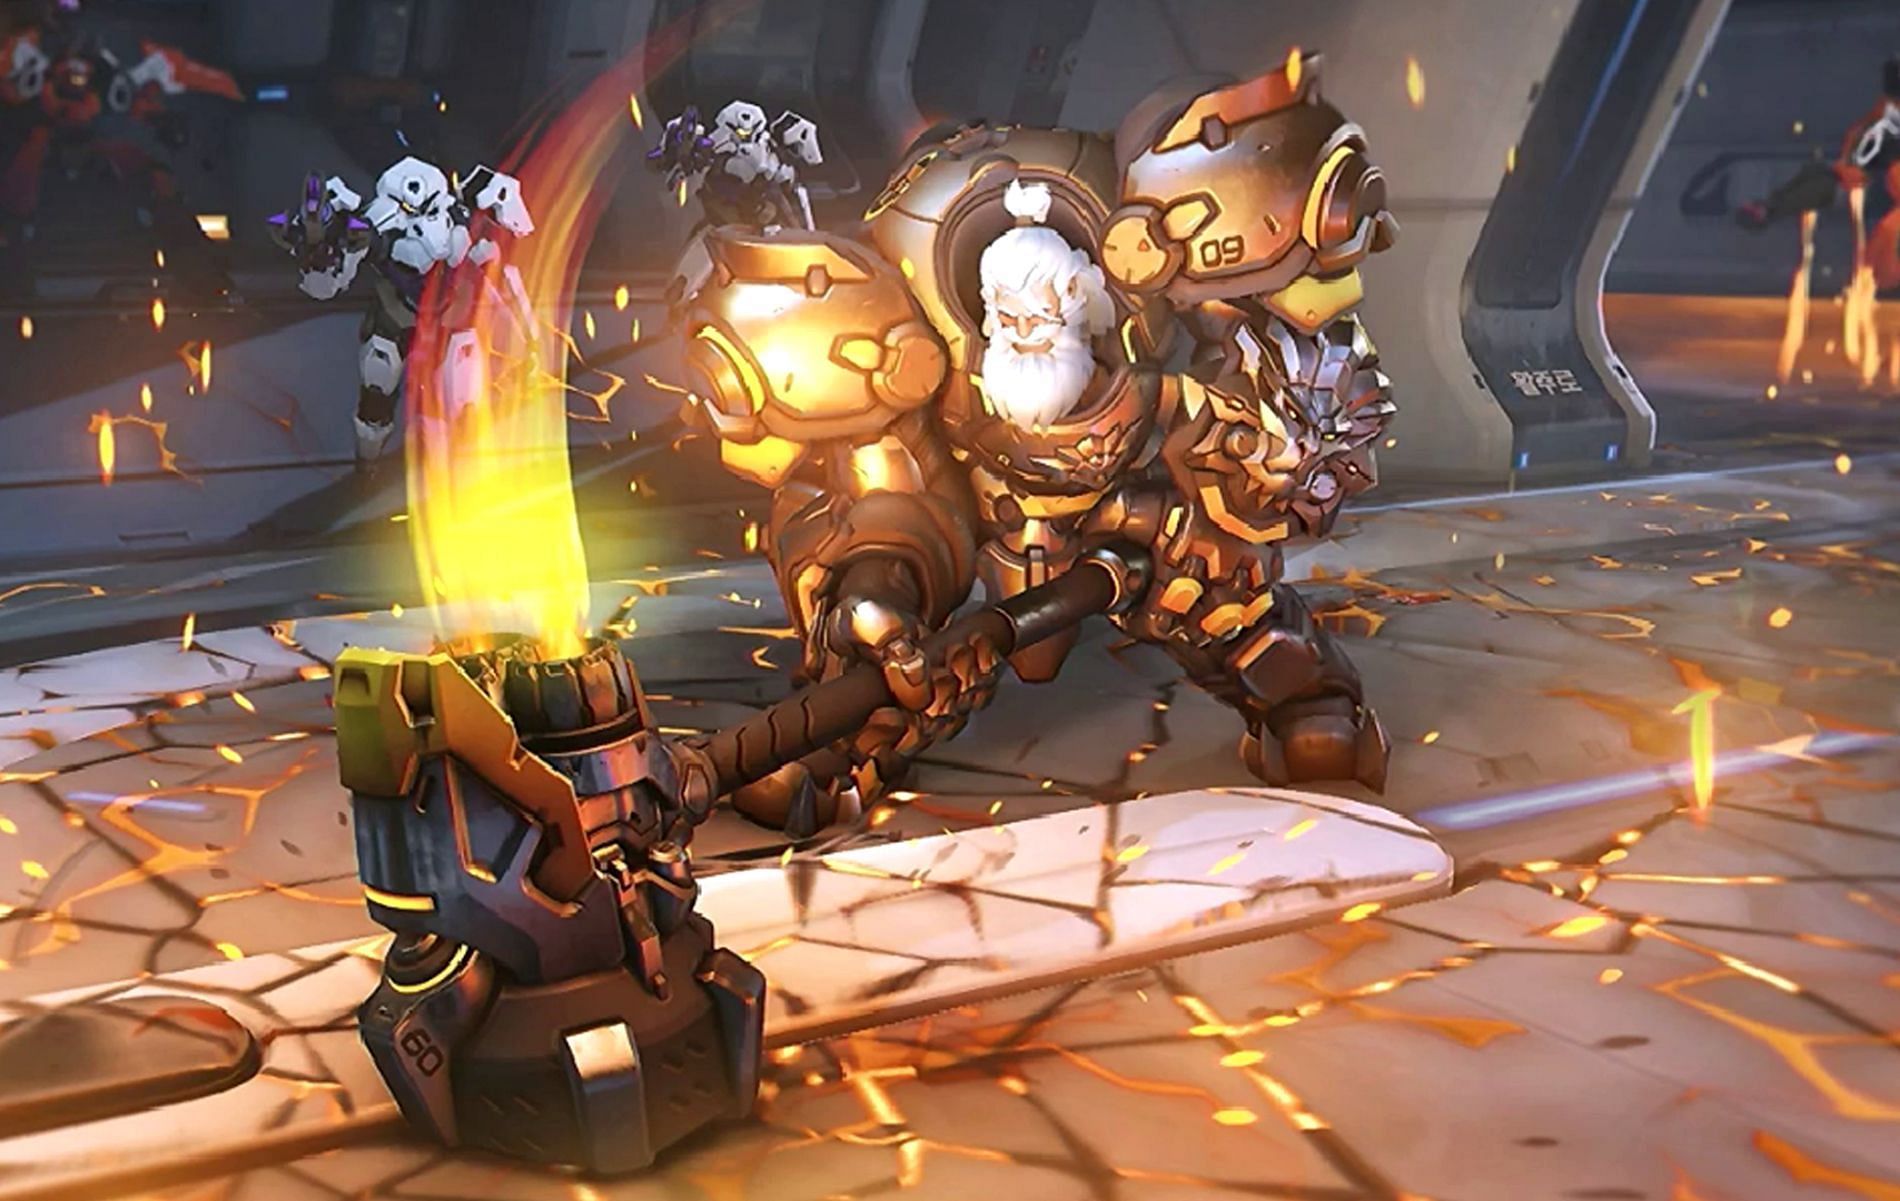 Reinhardt using his ultimate ability Earthshatter in the Overwatch 2 Beta version (Image via Blizzard Entertainment)